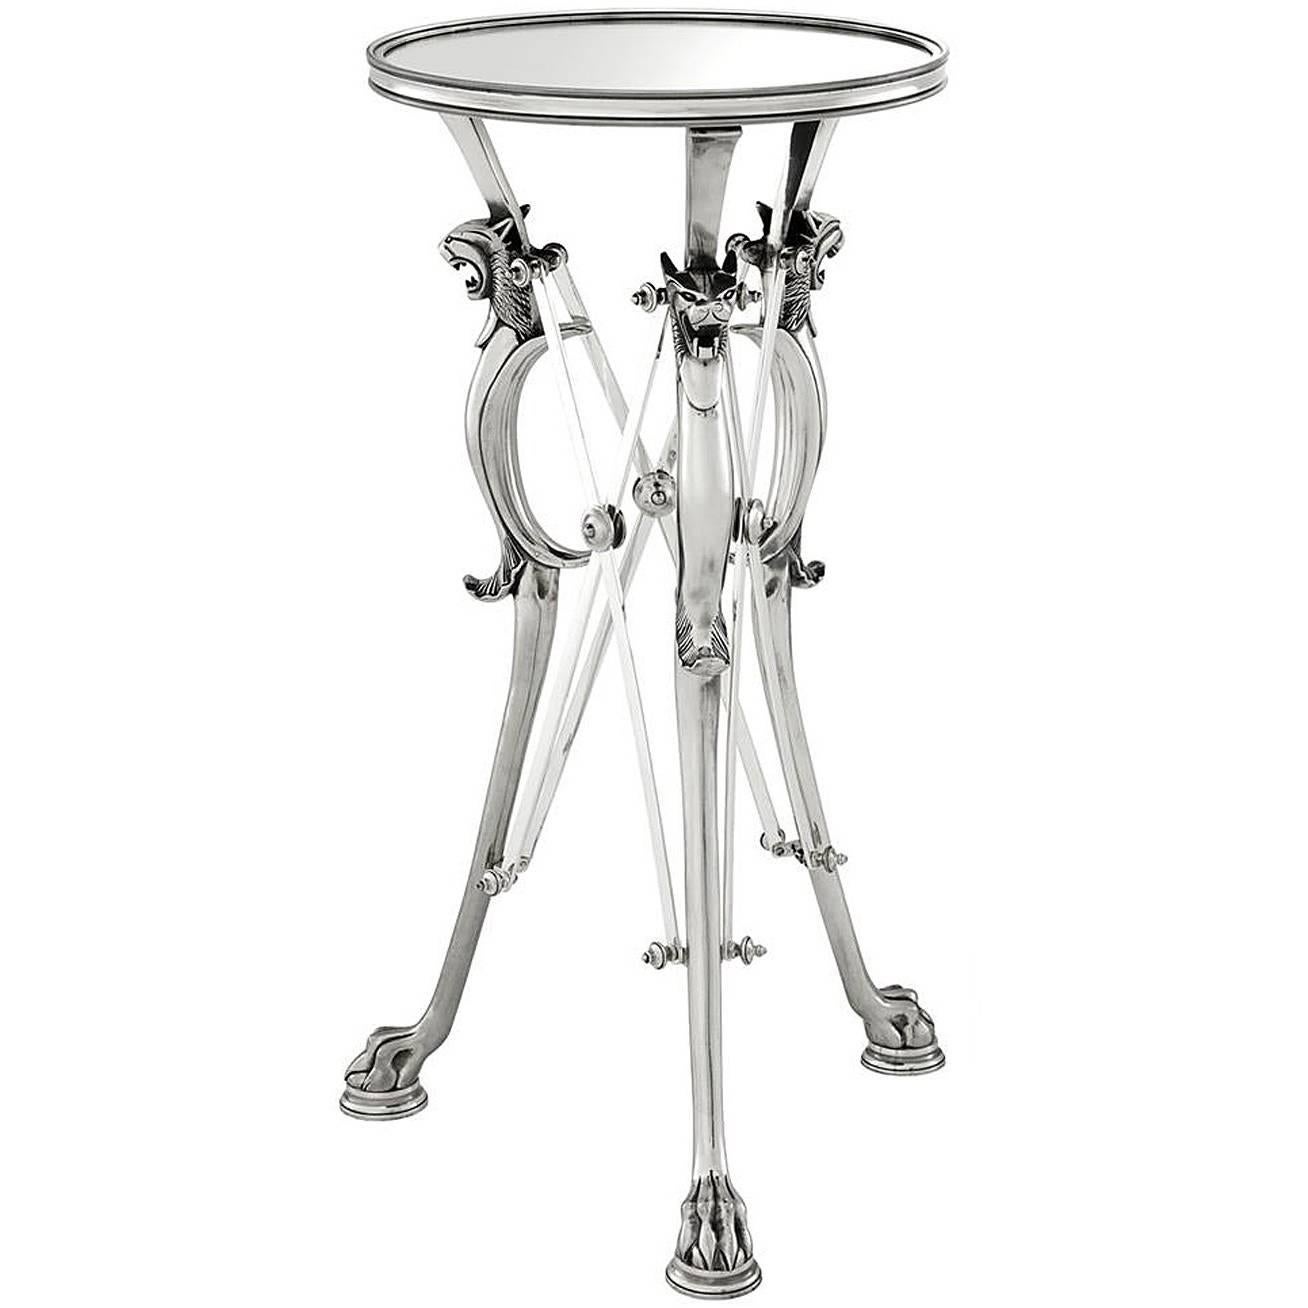 Feline Column in Antique Silver Plated Finish